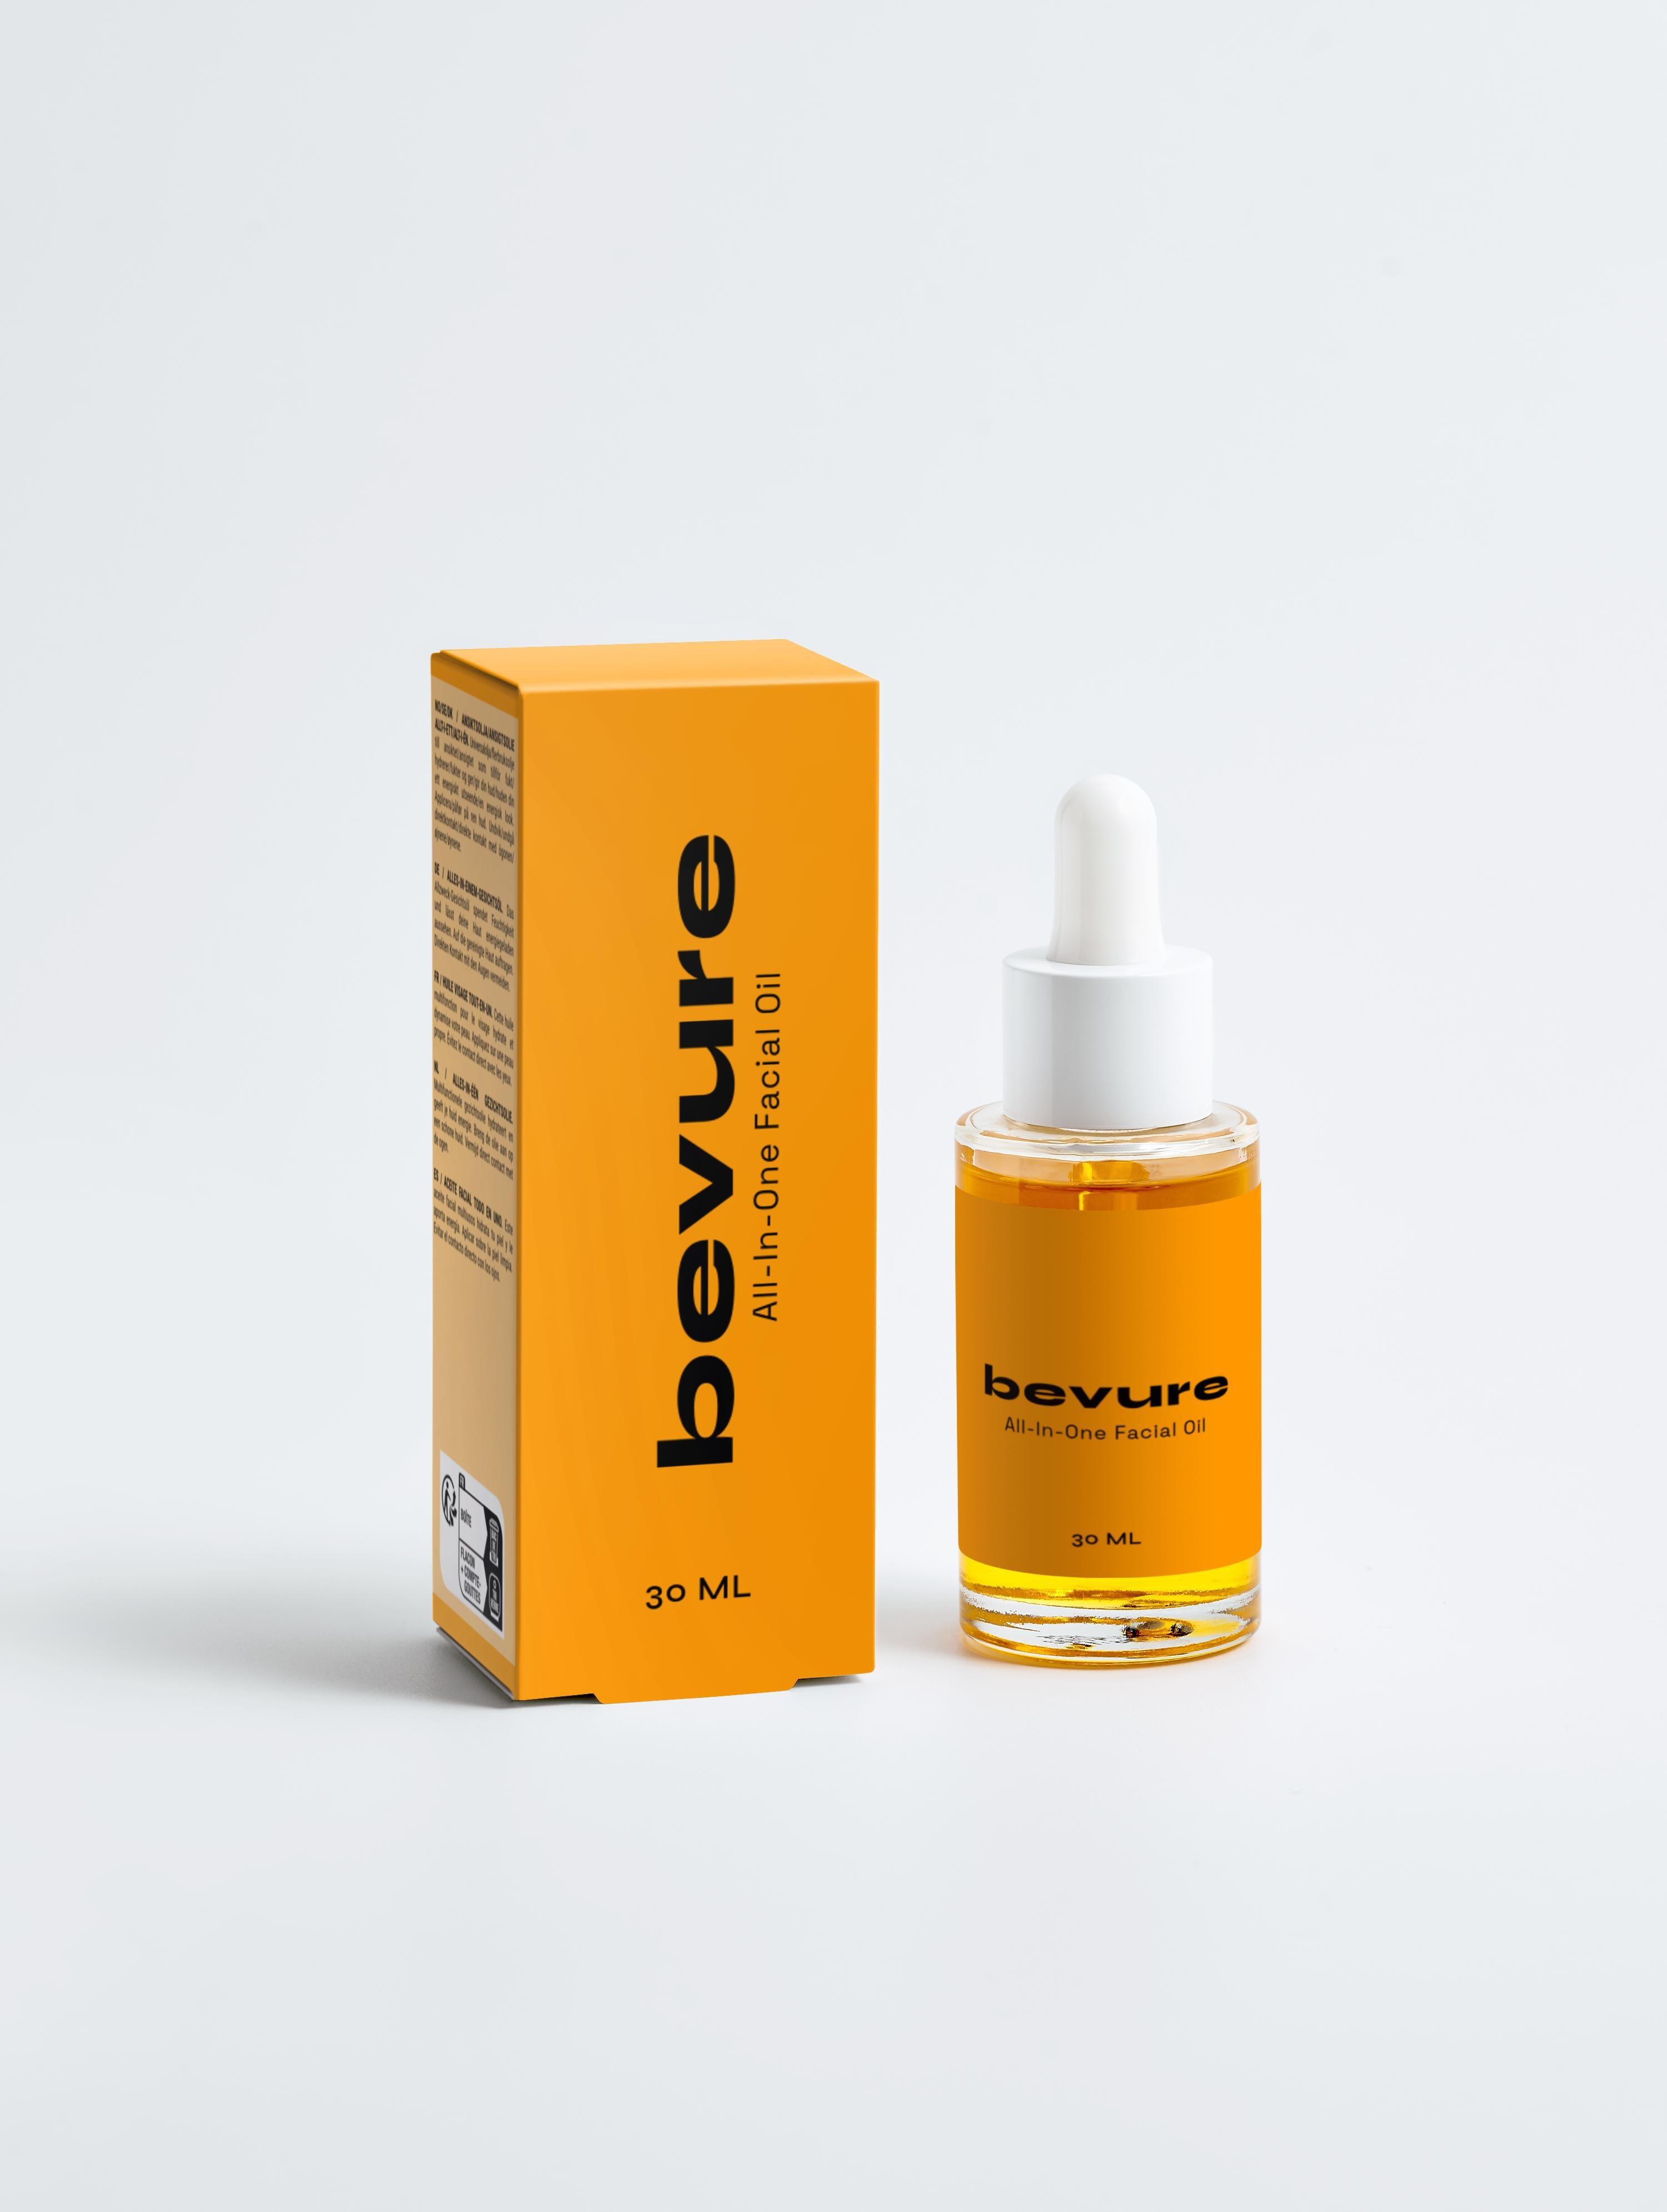 All-In-One Facial Oil - BEVURE